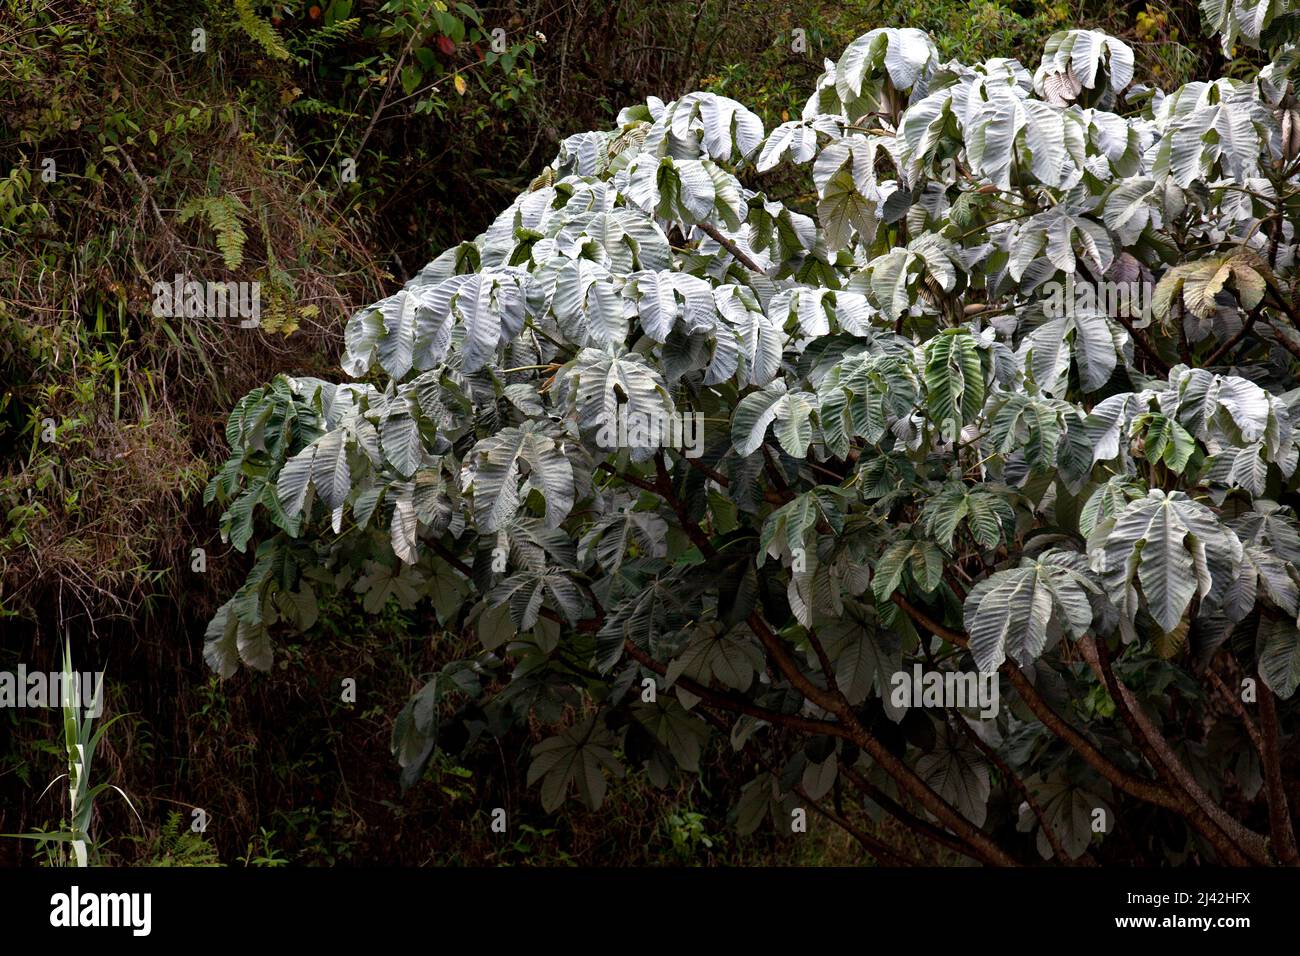 Cecropia peltata a representative tree of the cloudy forest in central and south america Stock Photo